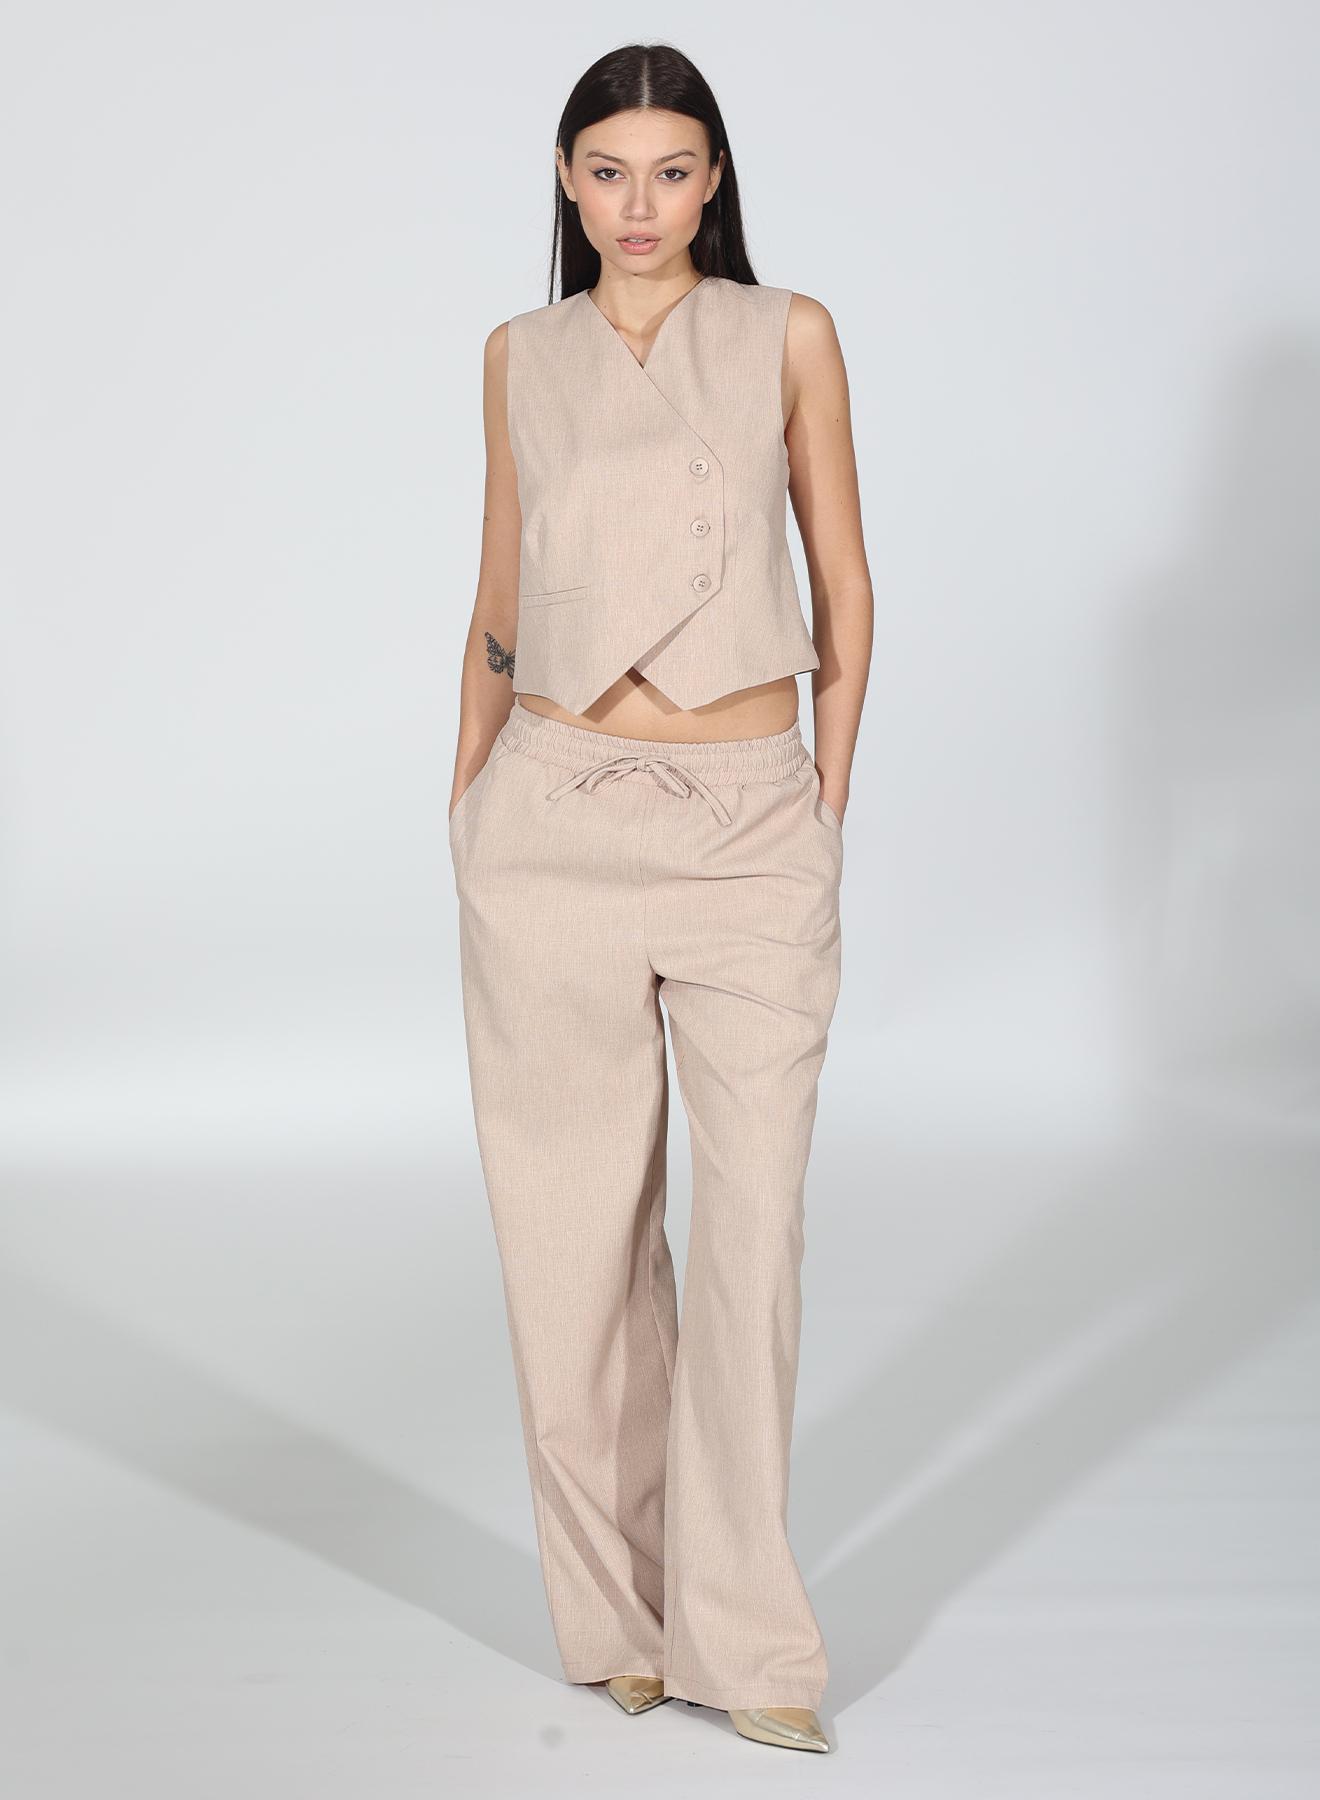 Beige wide legs Trousers with elastic waistband ties with cord R.R - 1